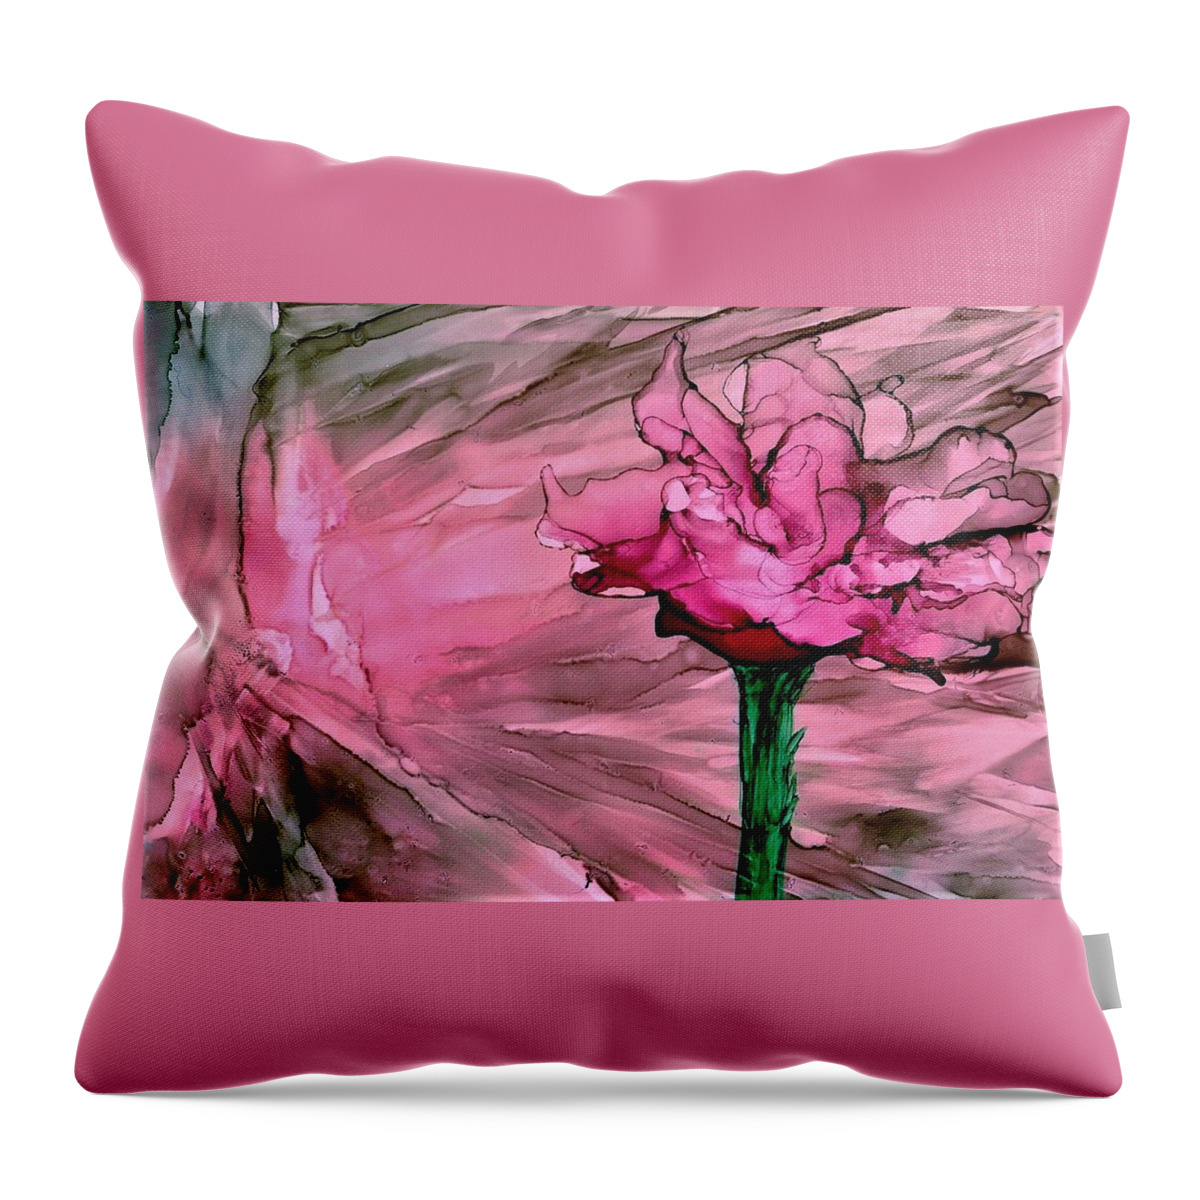 Pink Throw Pillow featuring the painting Happy Birthday by Angela Marinari